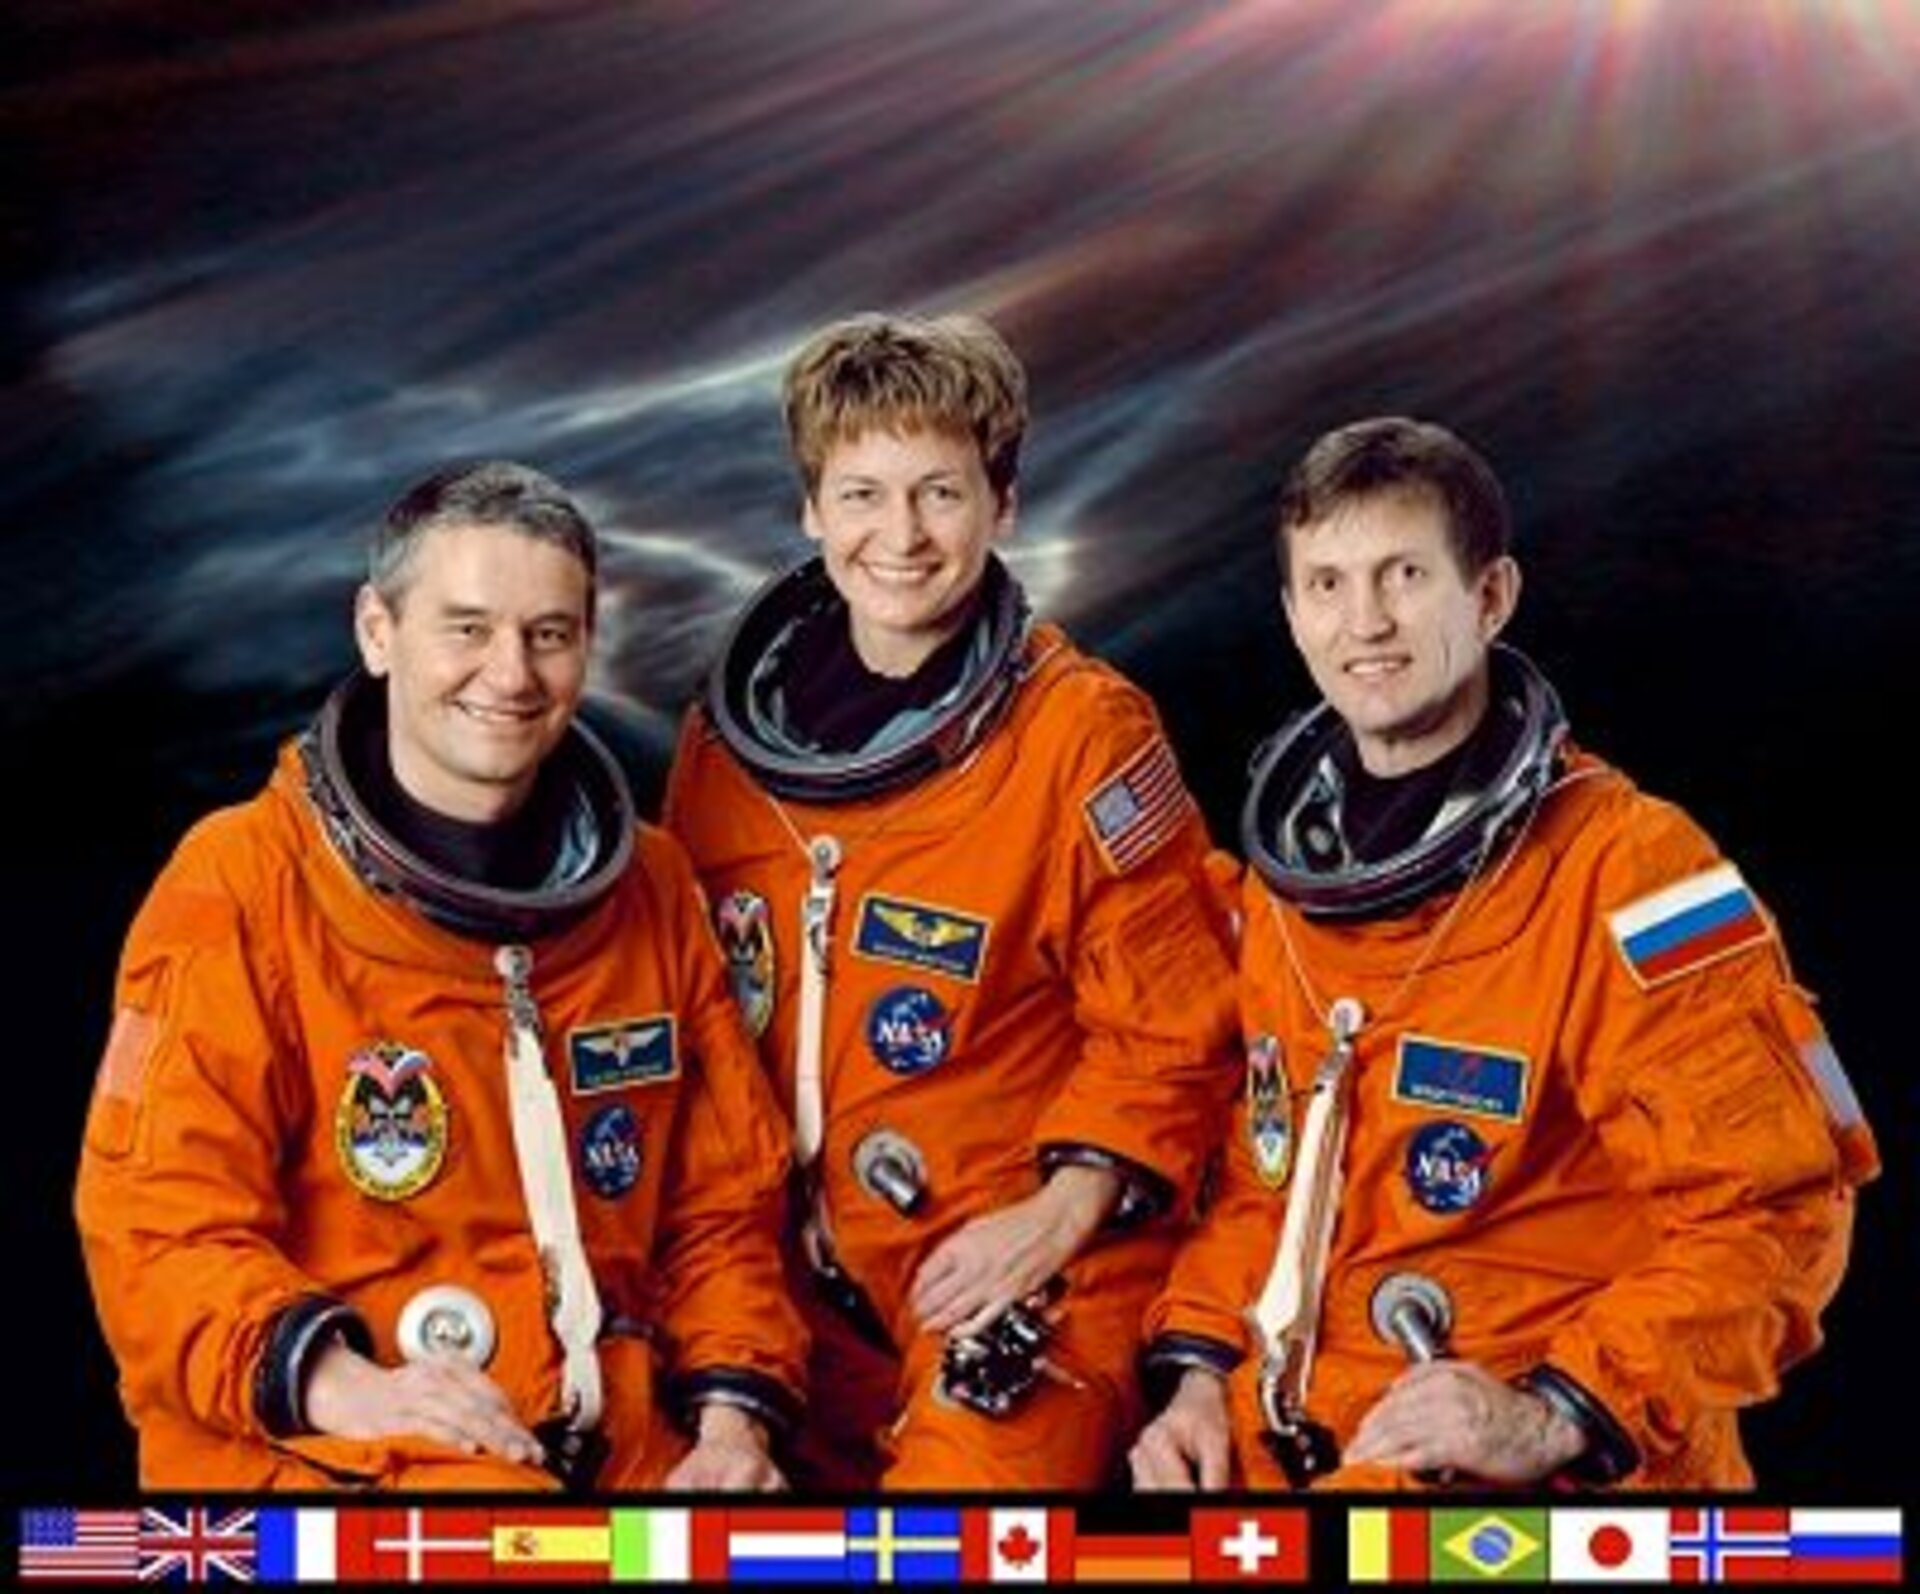 Expedition Five crew